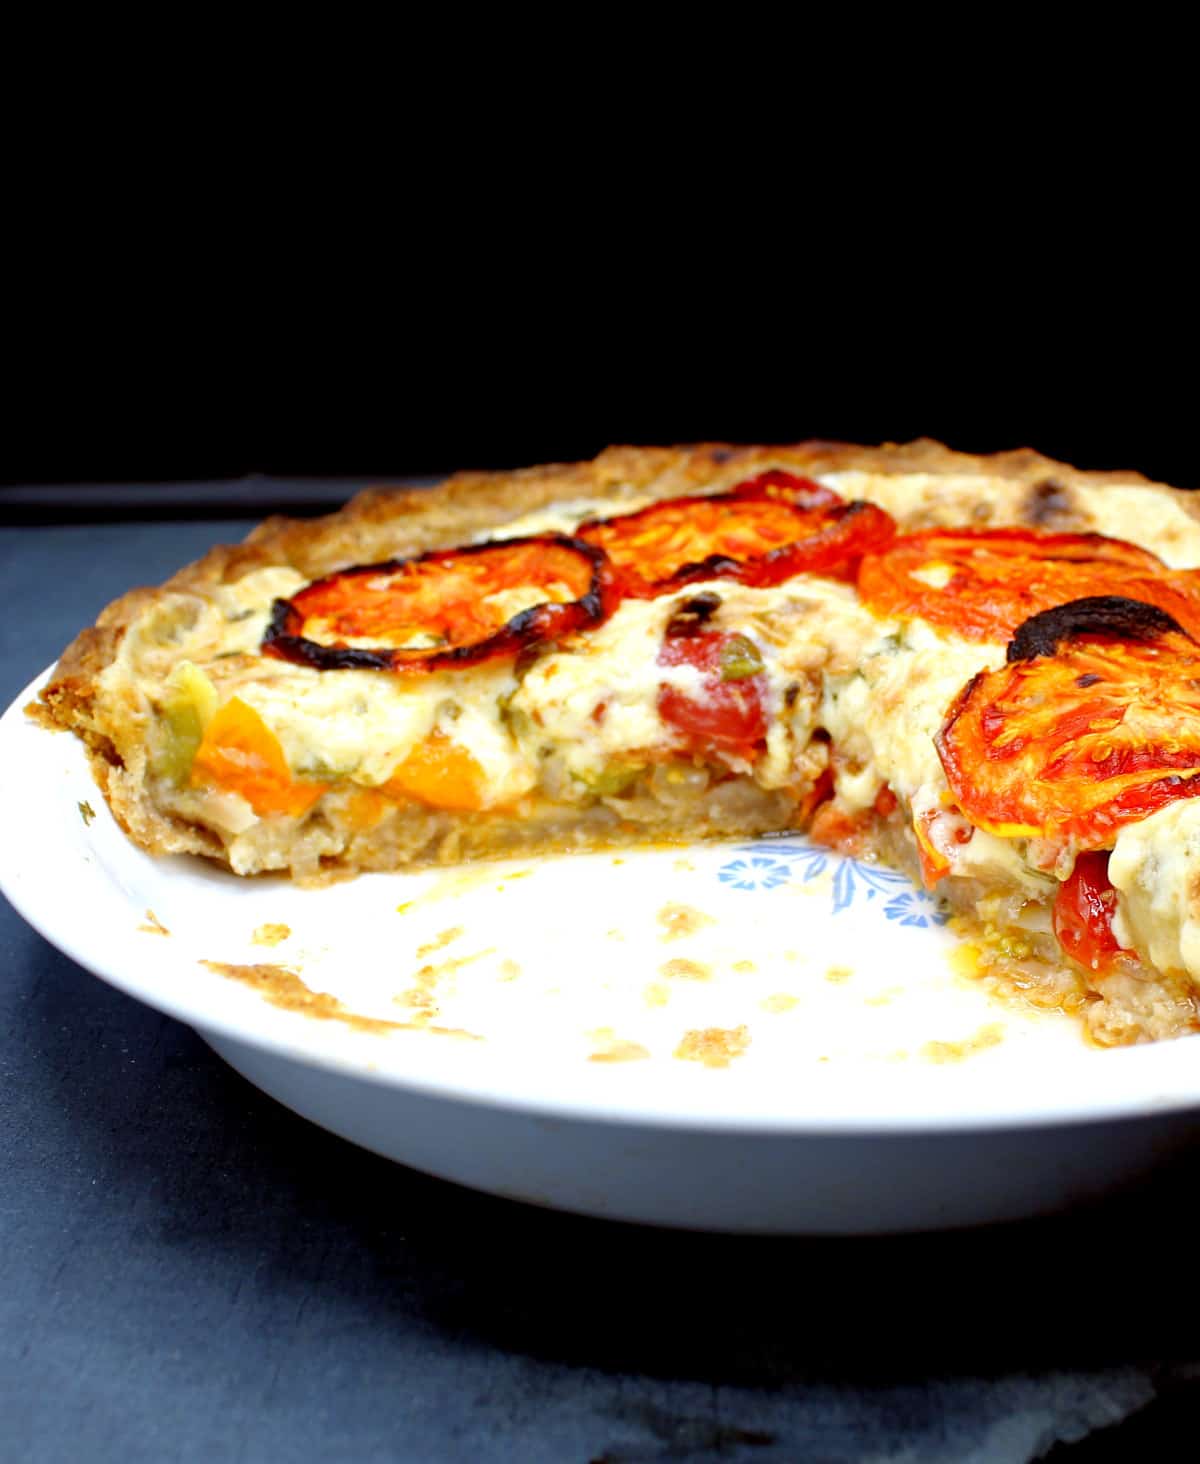 Photo showing a cross section of a vegan tomato pie with a gooey mayo-cheese filling.